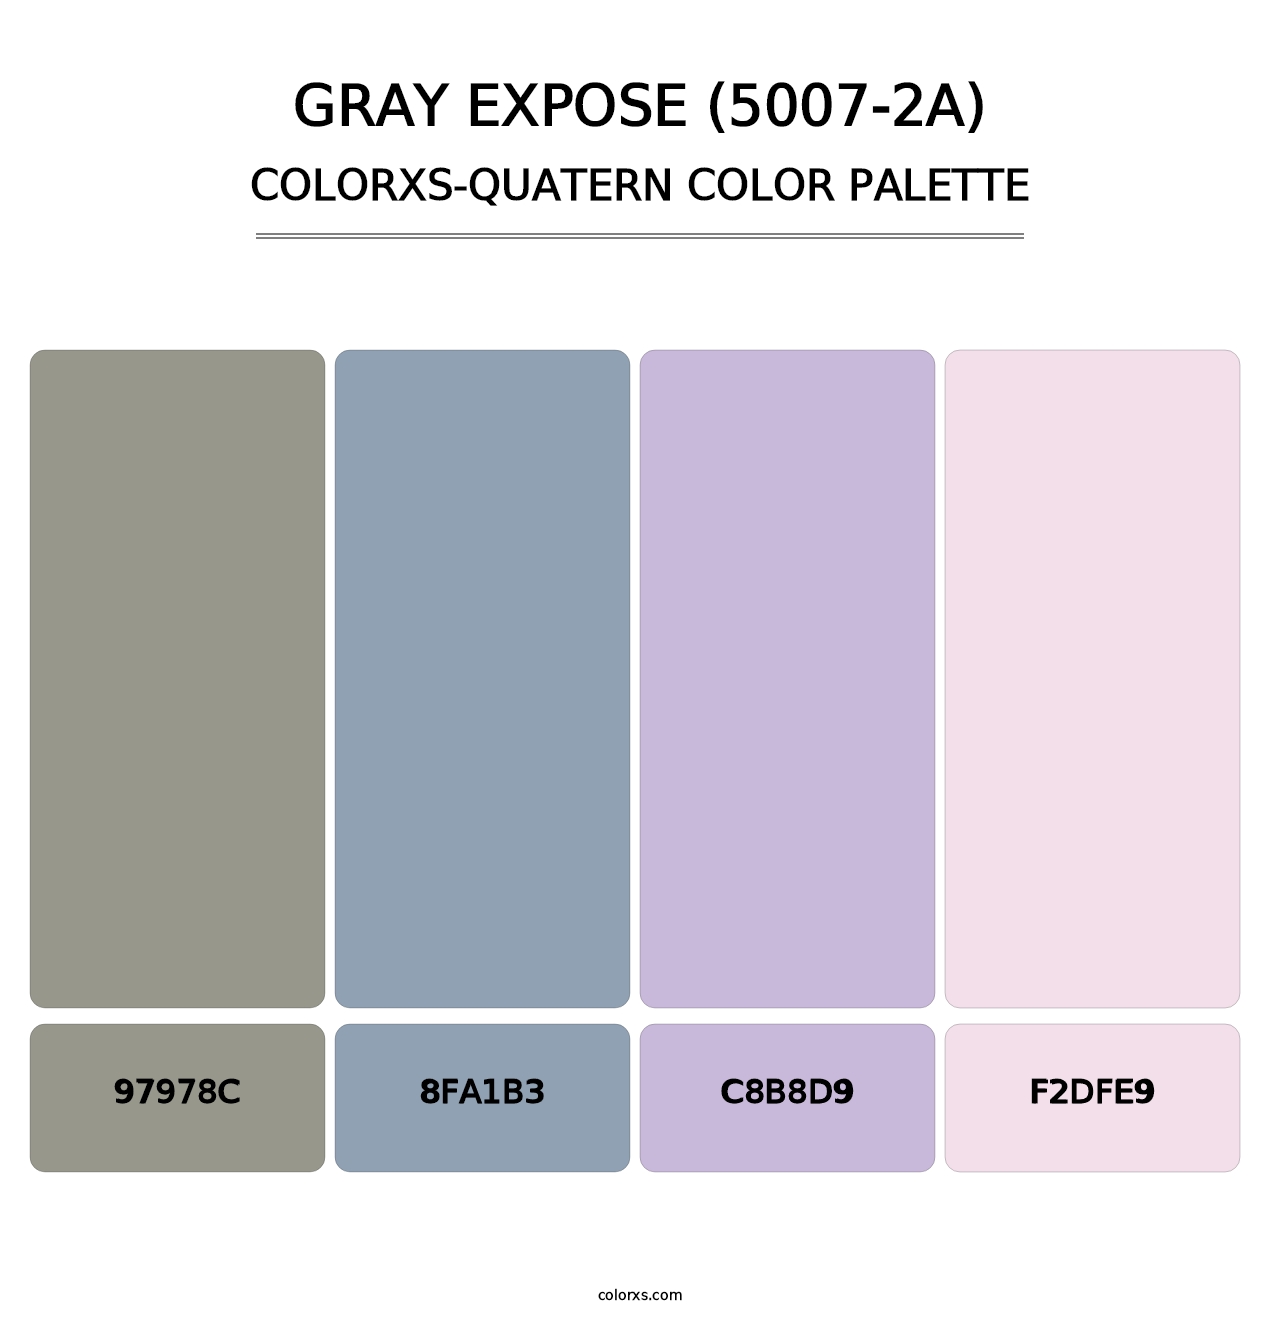 Gray Expose (5007-2A) - Colorxs Quatern Palette